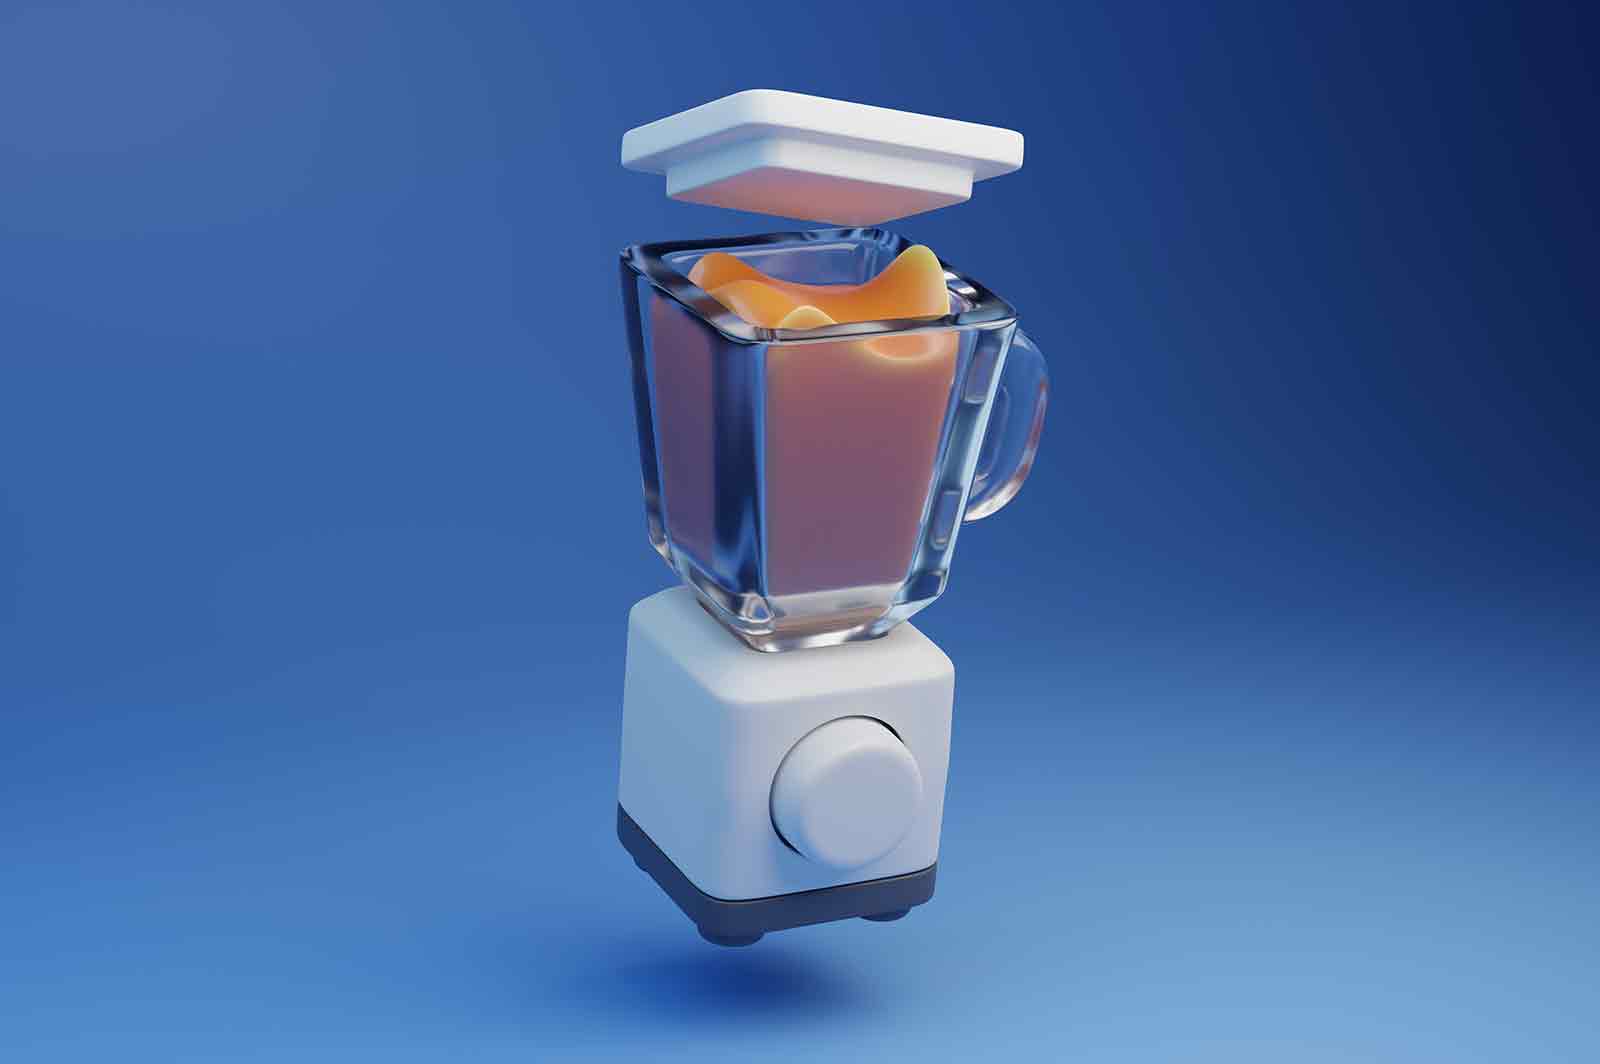 Blender with fruit cocktail 3d rendered illustration. Kitchen equipment or appliance for cooking, making drinks and smoothies